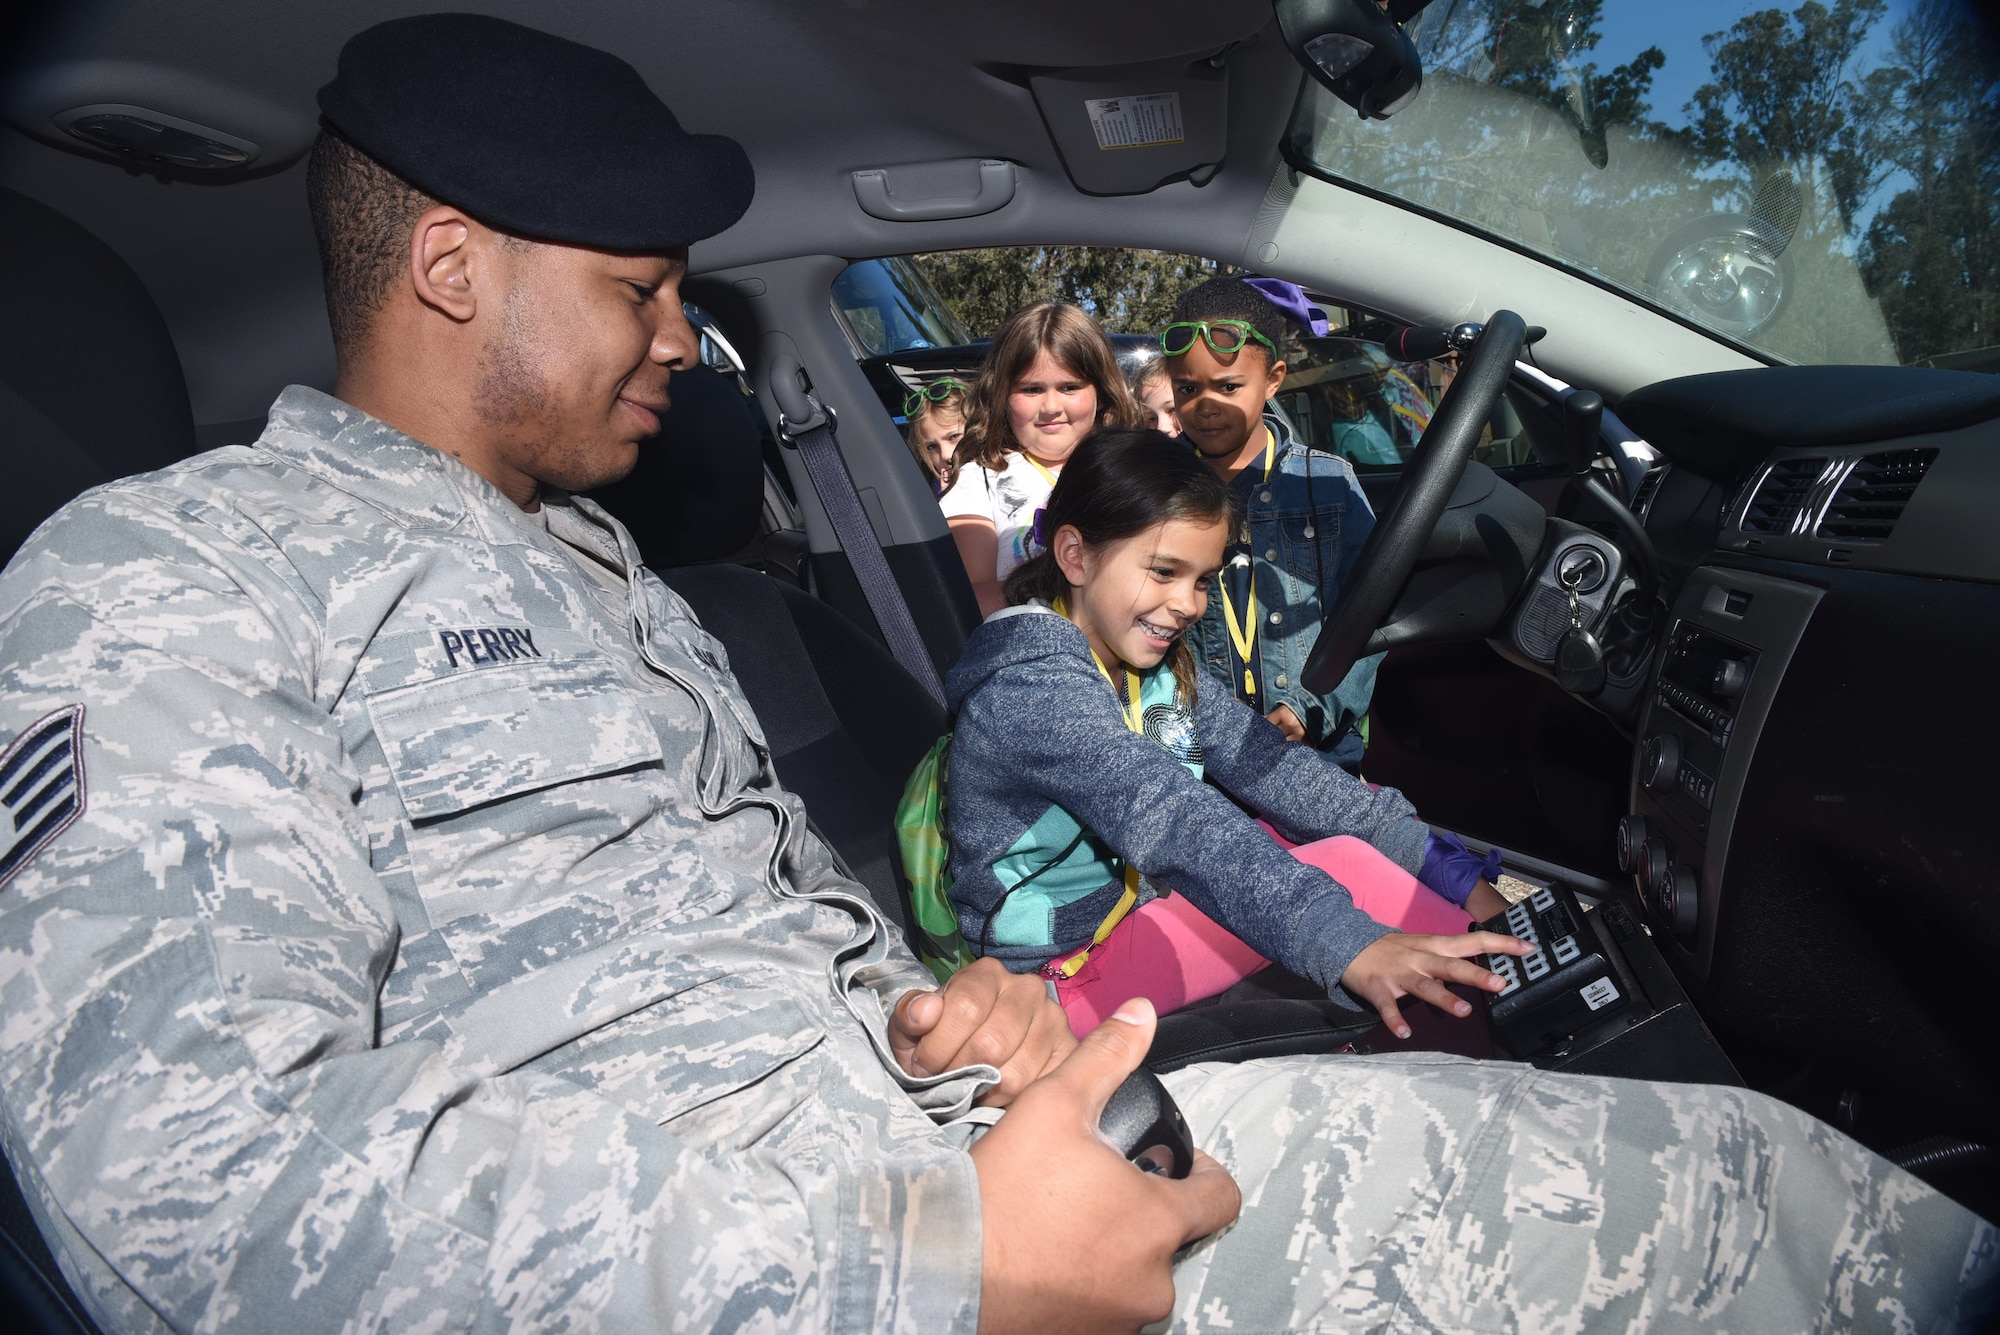 Staff Sgt. Benjamin Perry, 30th Security Forces patrolman, demonstrates patrol car capabilities during Kids Understanding Deployment Operations, March 29, 2016, Vandenberg Air Force Base, Calif. KUDOS is a program developed to give children a deeper understanding of the military deployment process and equipment utilized during a deployment. (U.S. Air Force photo by Staff Sgt. Jim Araos/Released)